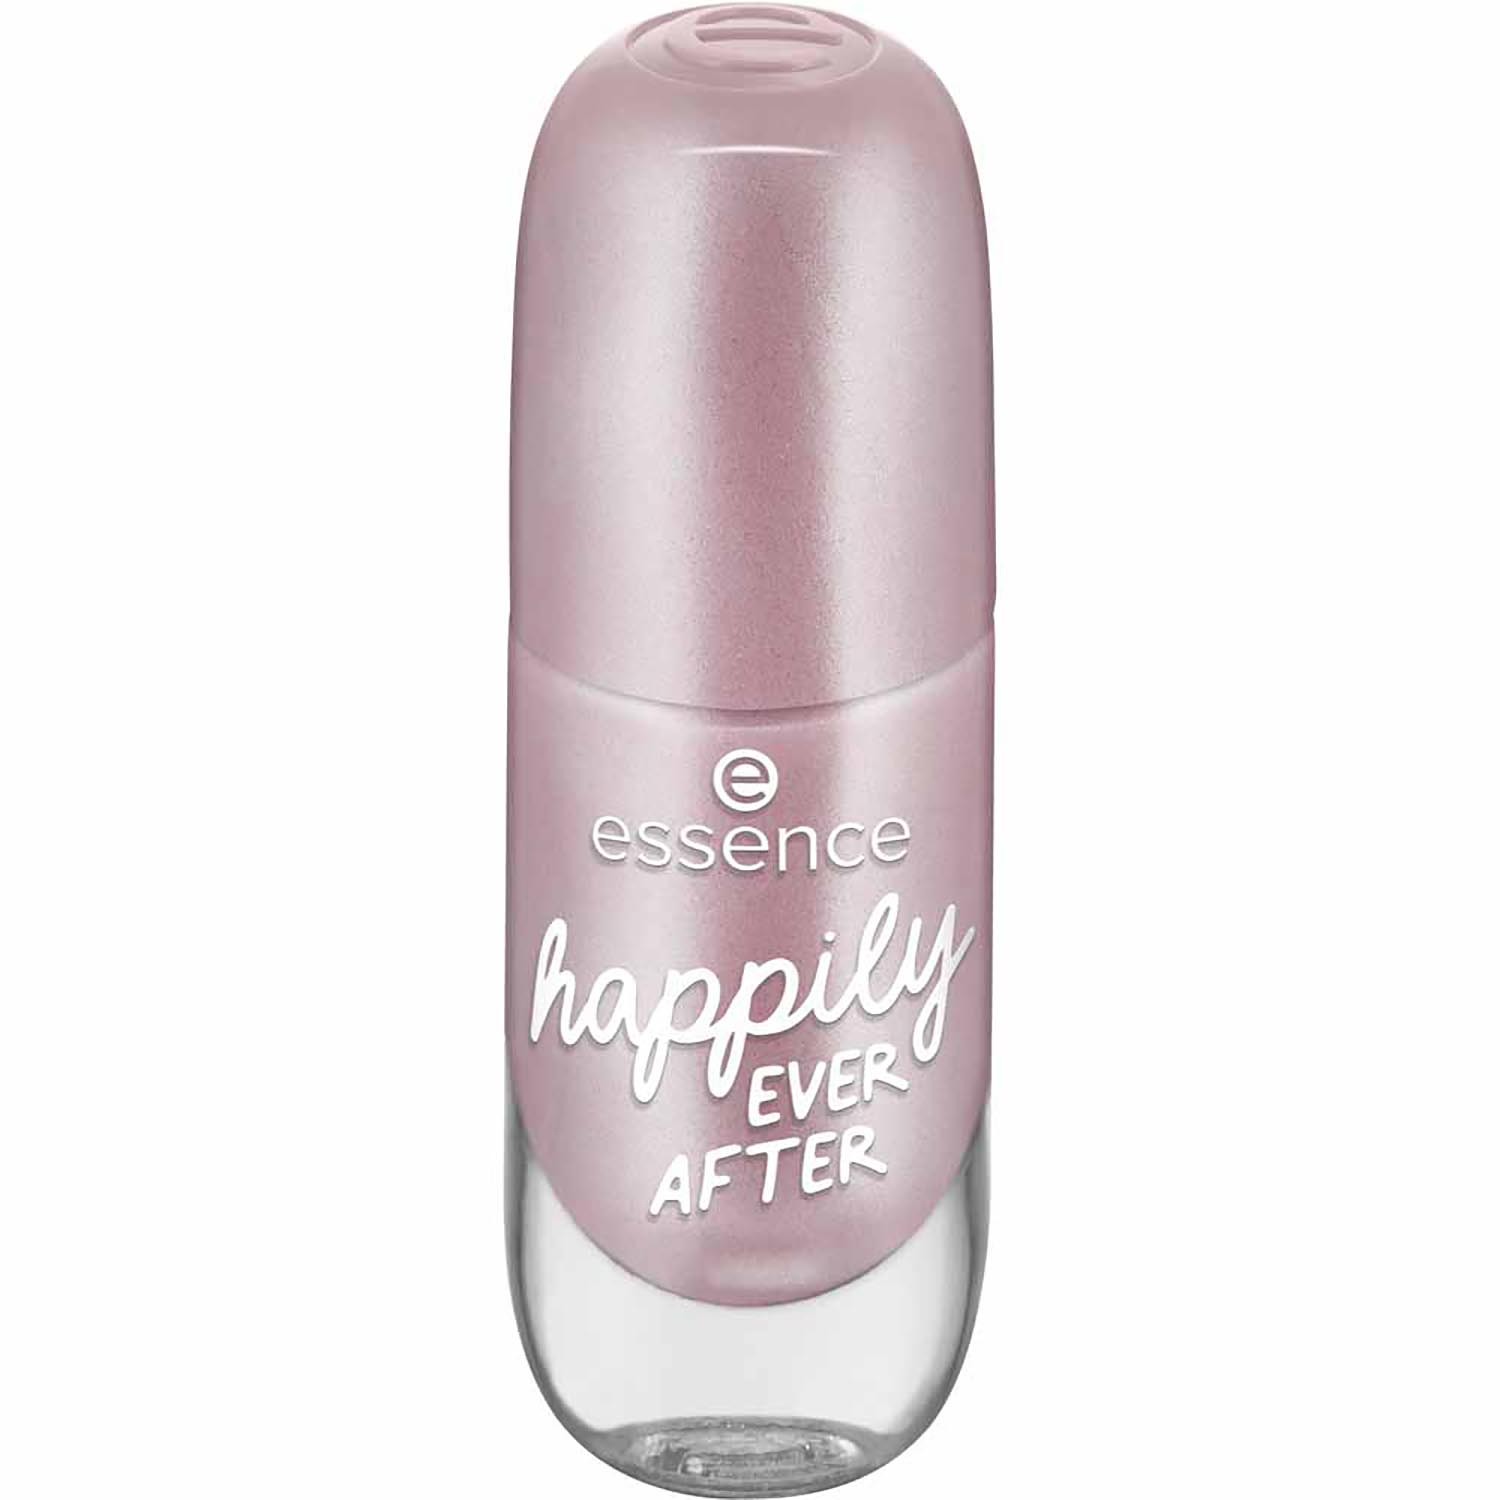 essence Gel Nail Colour - Happily Ever After Image 1